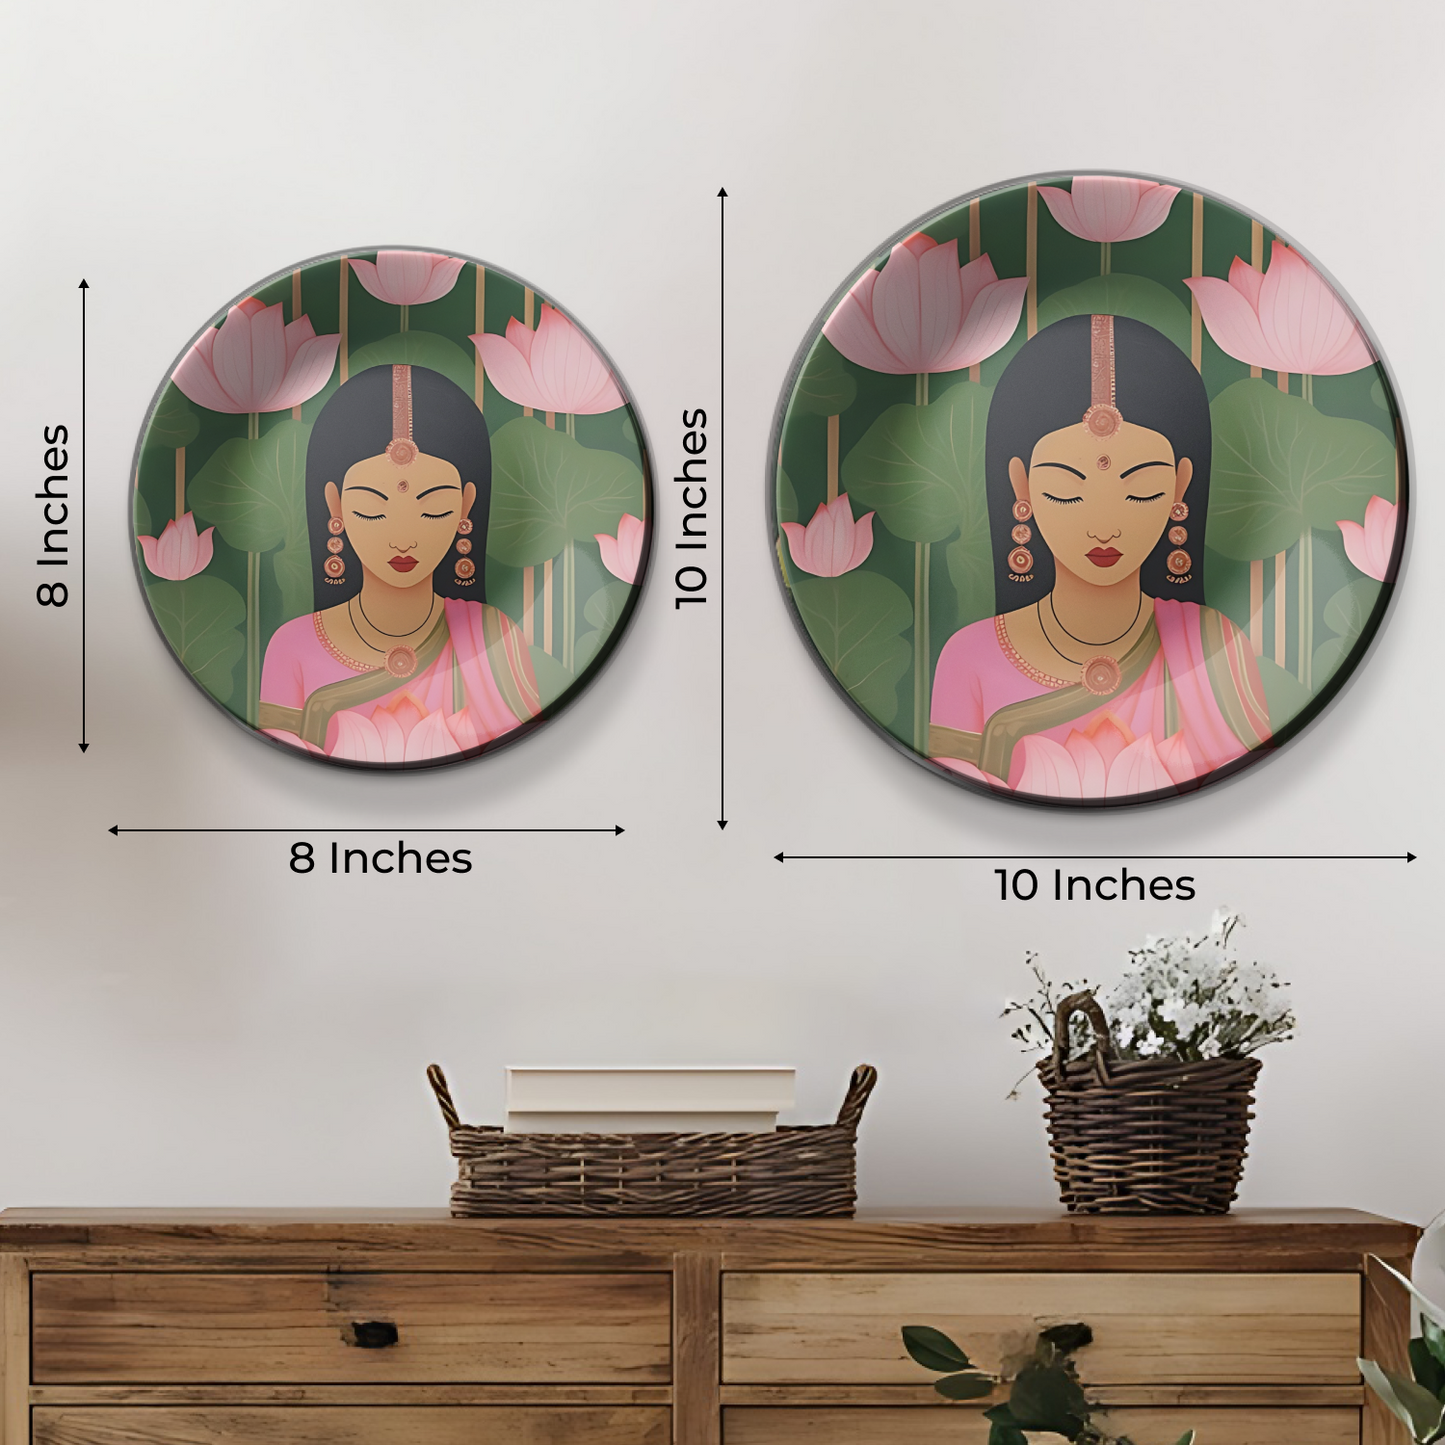 Authentic Set of 3 Lotus and Woman Wall Plates Décor Reflecting Natural Beauty and Grace